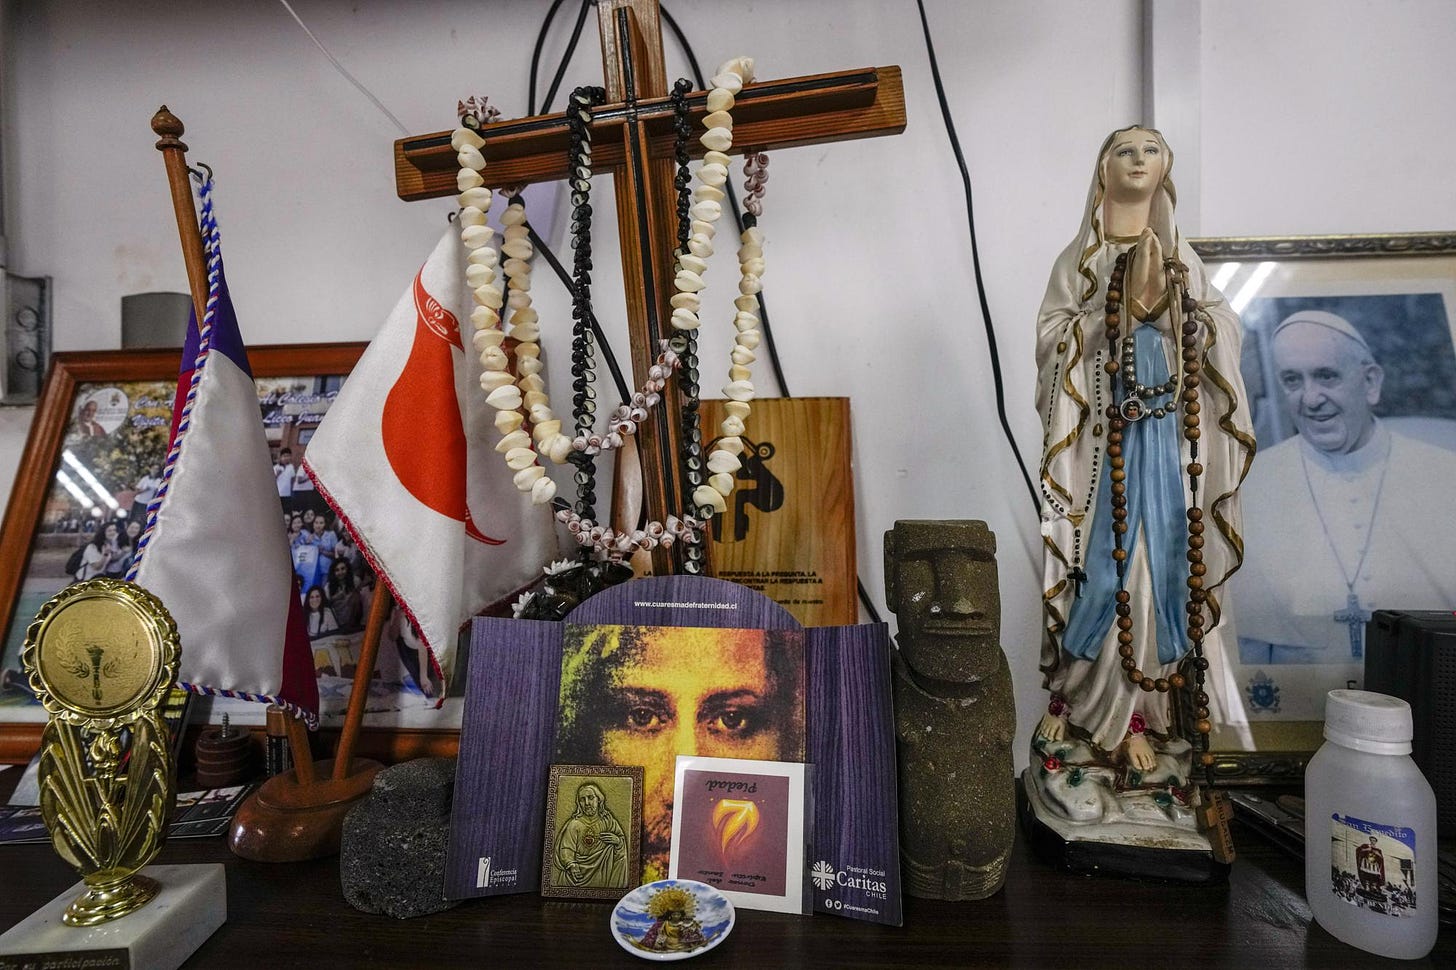 A small replica of a moai statue stands on an altar with religious iconology in the administration office at the Eugenio Eyraud Catholic school in Hanga Roa, Rapa Nui or Easter Island, Chile, Wednesday, Nov. 23, 2022. The first Europeans arrived to Rapa Nui in 1722, soon followed by missionaries, when Rapanui religiosity began to intertwine with Christianity. (AP Photo/Esteban Felix)